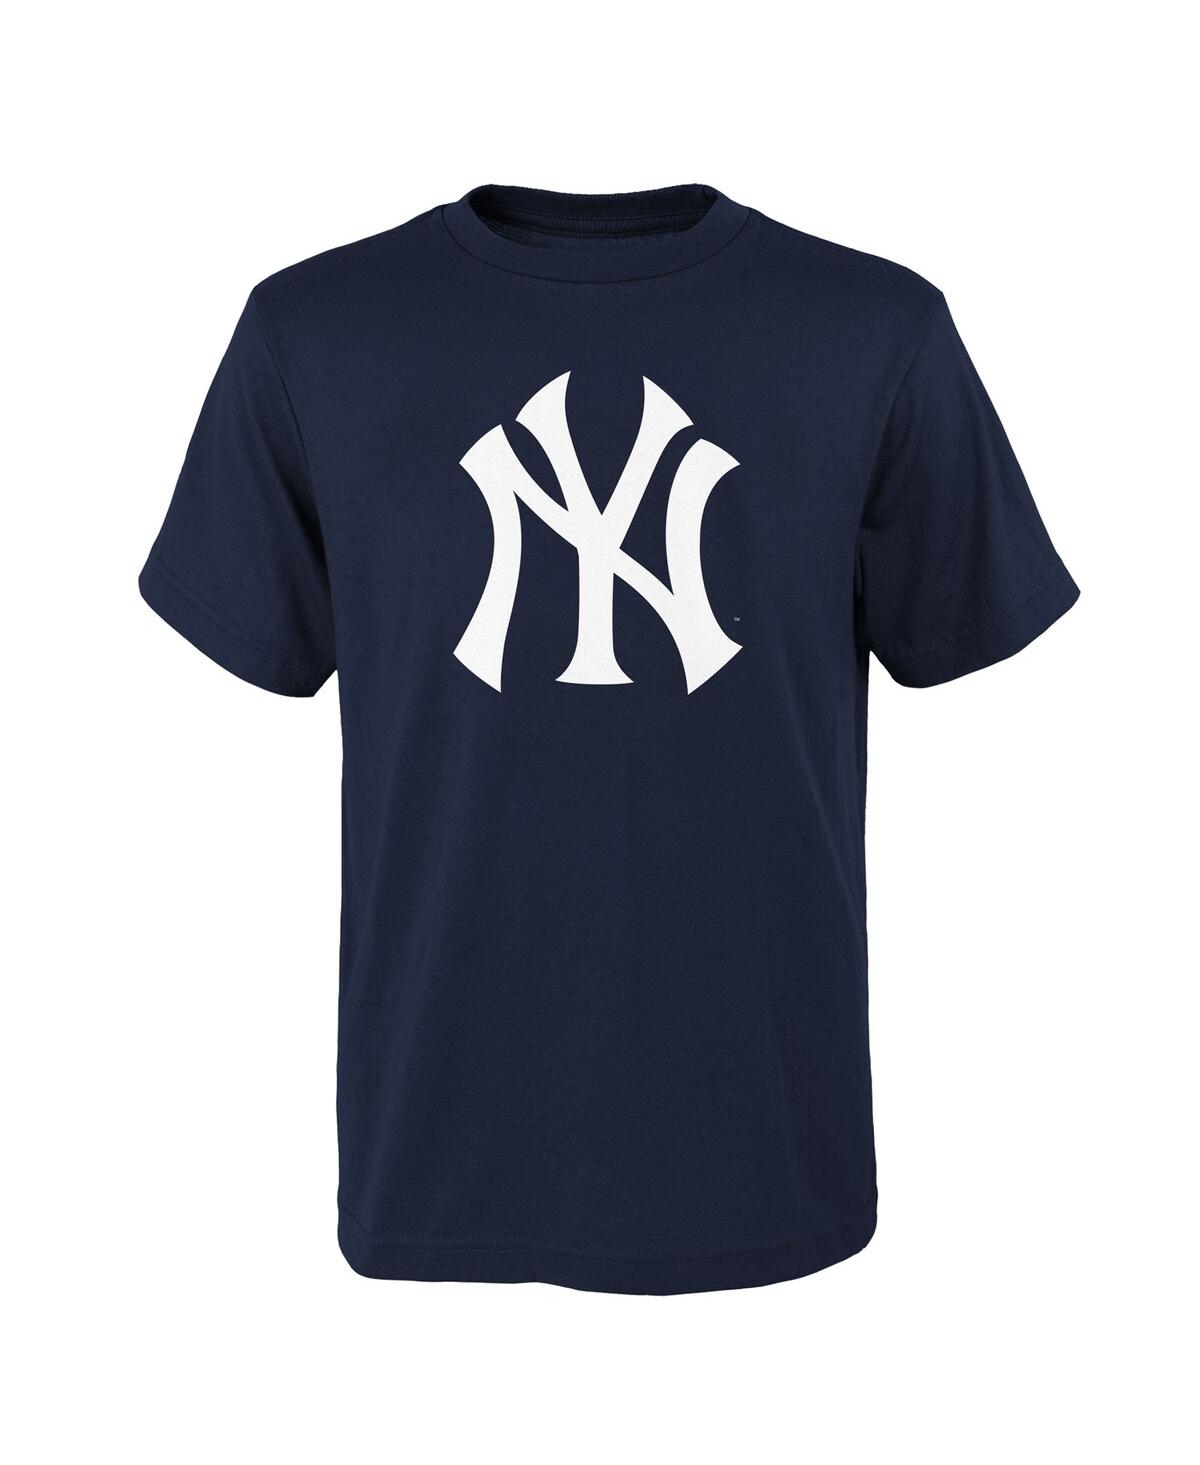 Outerstuff Kids' Big Boys And Girls Navy New York Yankees Logo Primary Team T-shirt